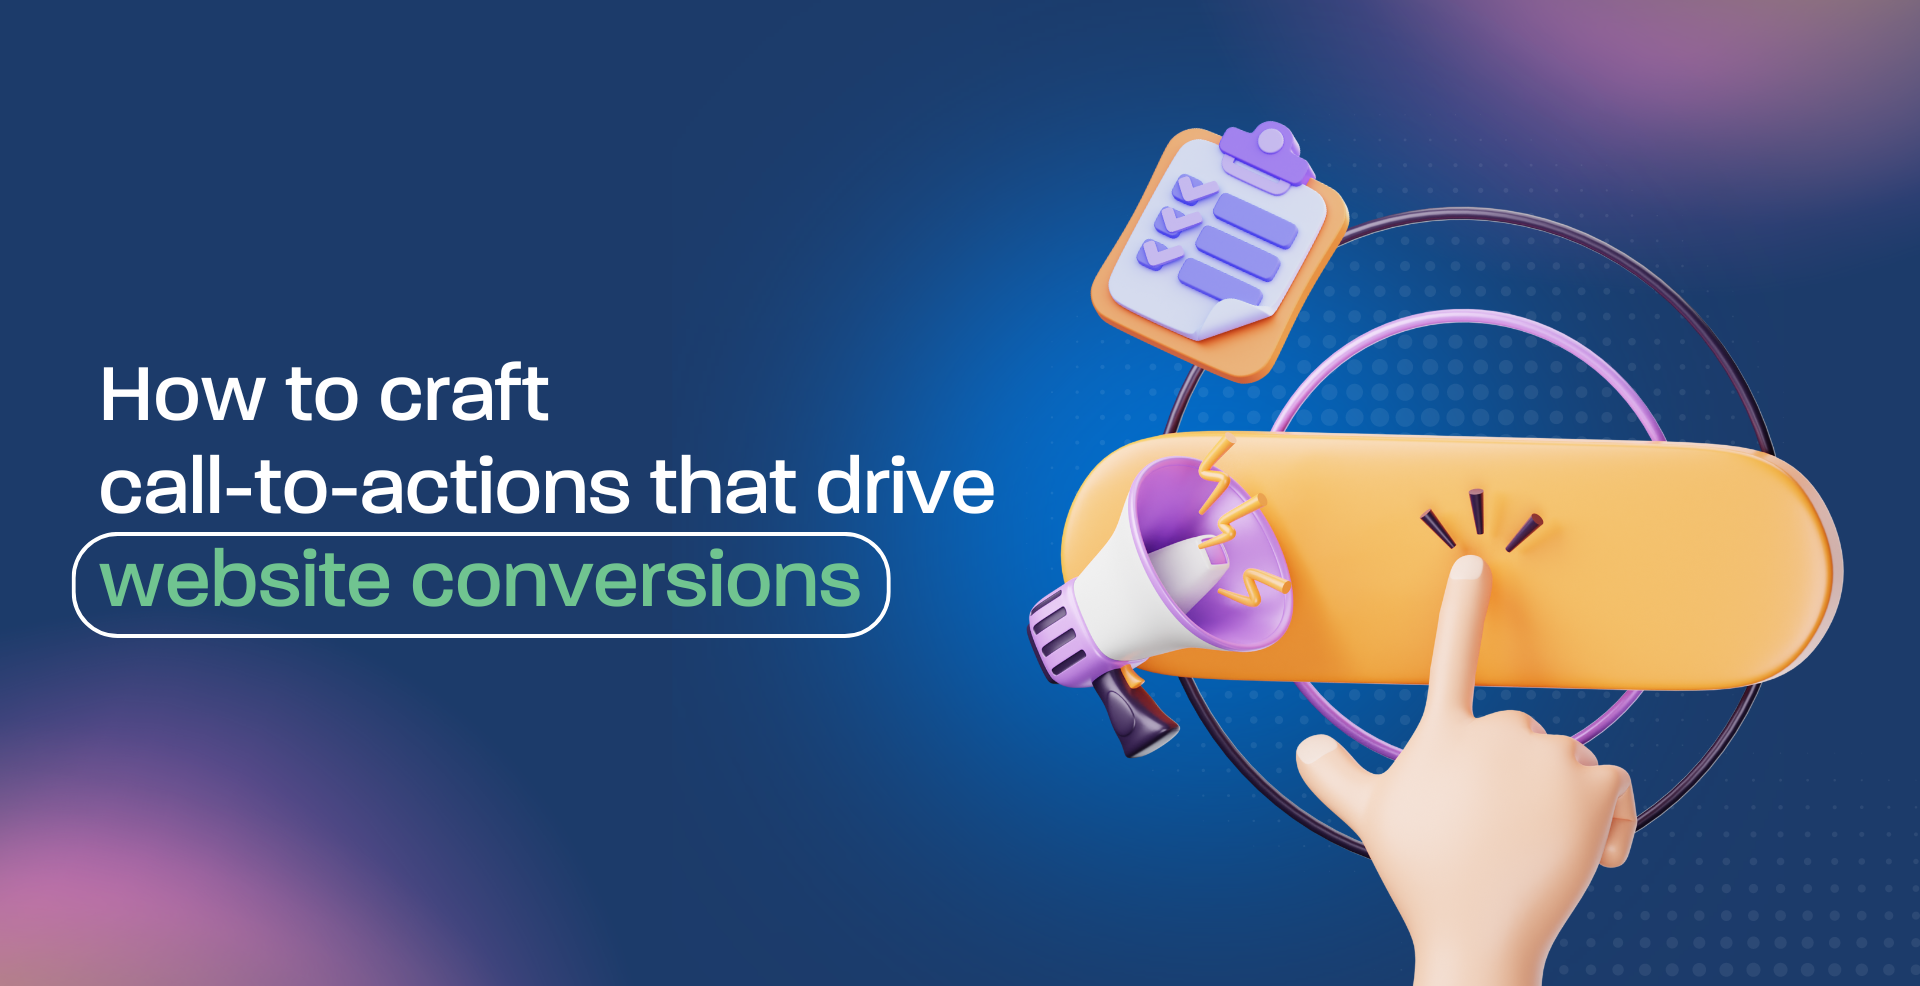 How to craft call-to-actions that drive website conversions